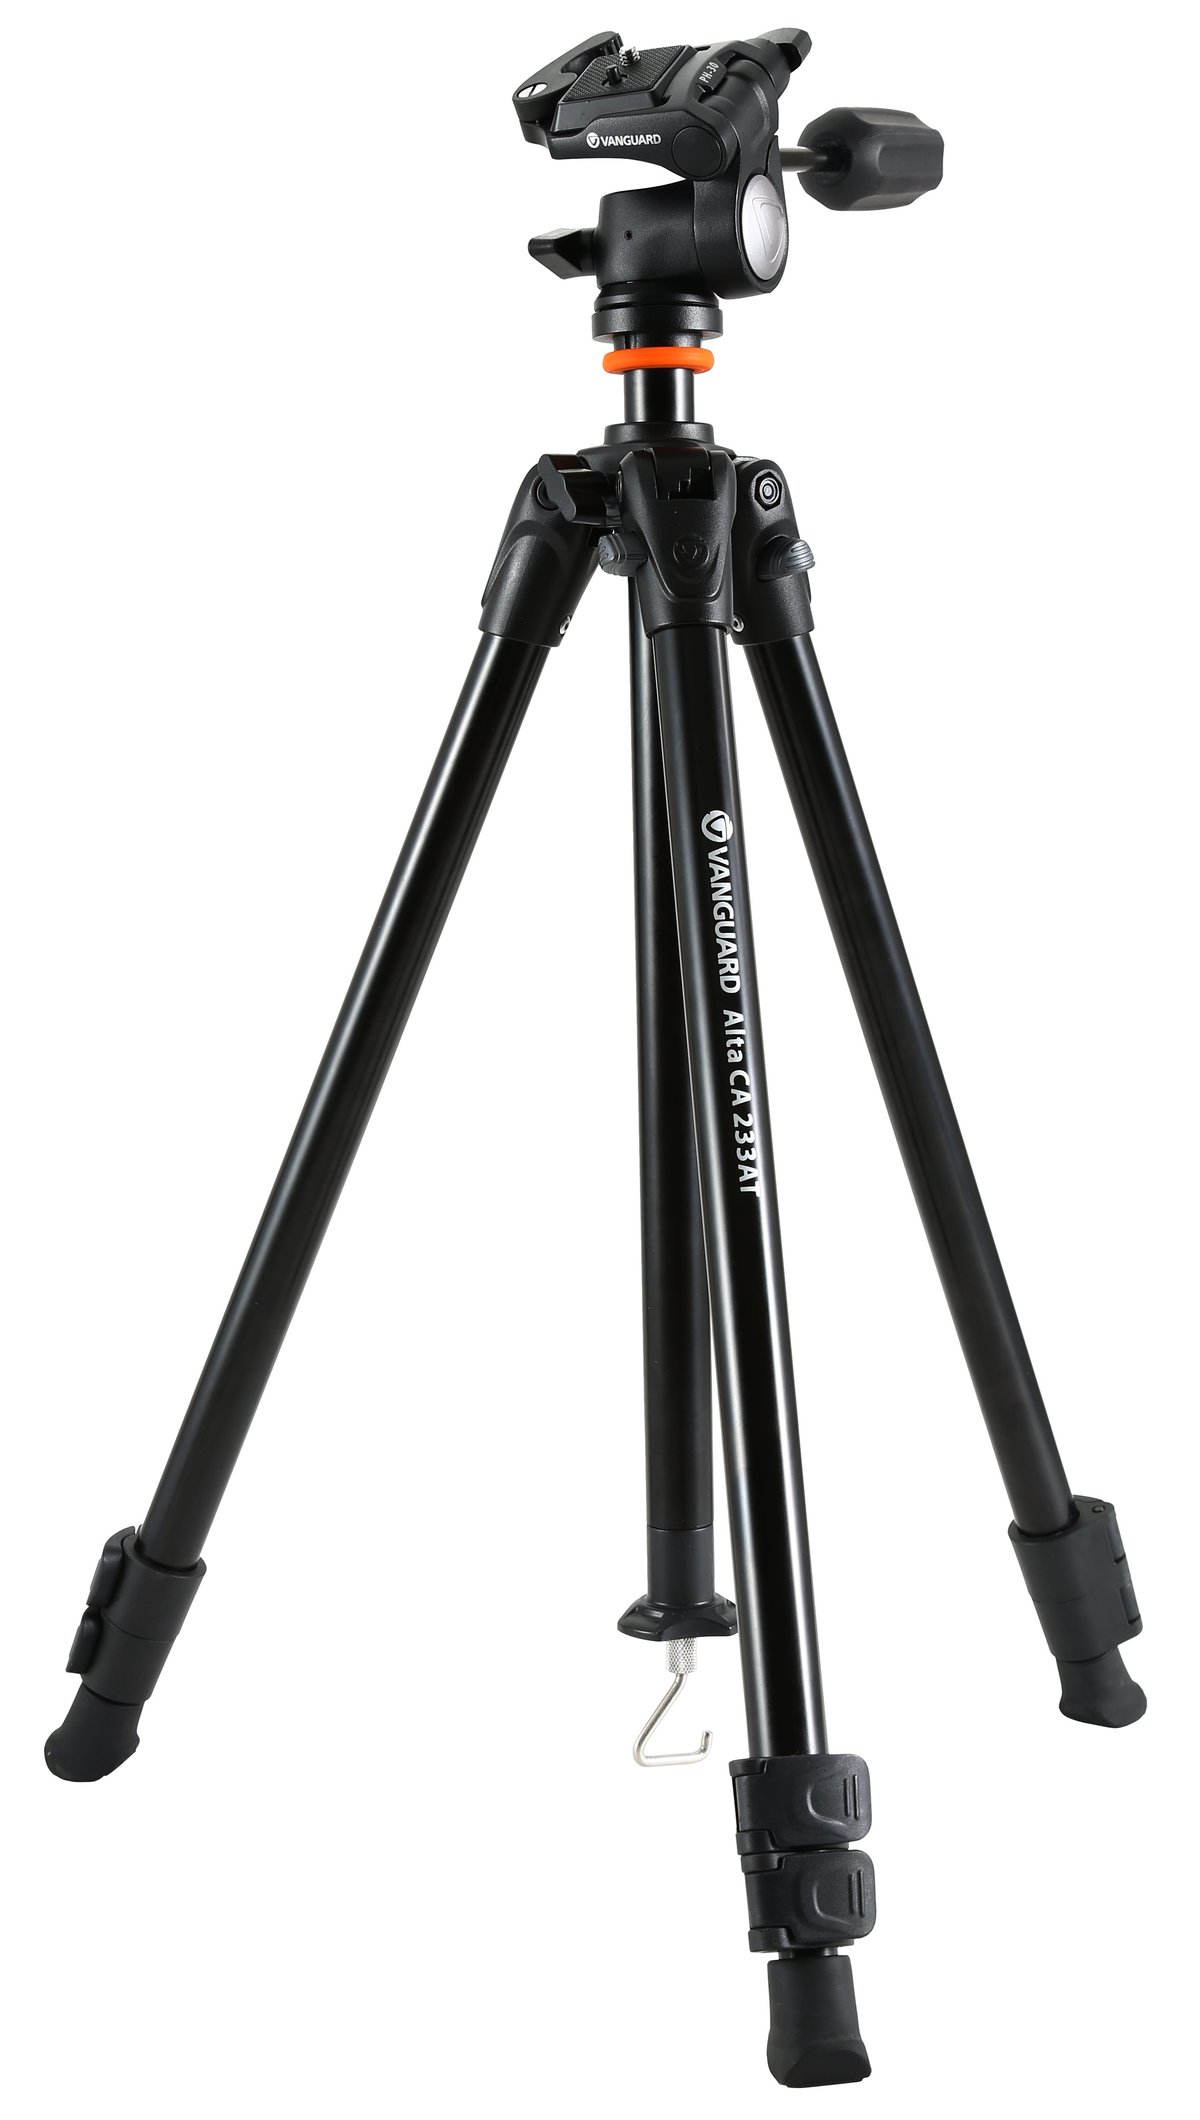 STEAL OF THE WEEK (while supplies last) - ALTA CA 233AO Aluminum Tripod with 3-Way Pan Head